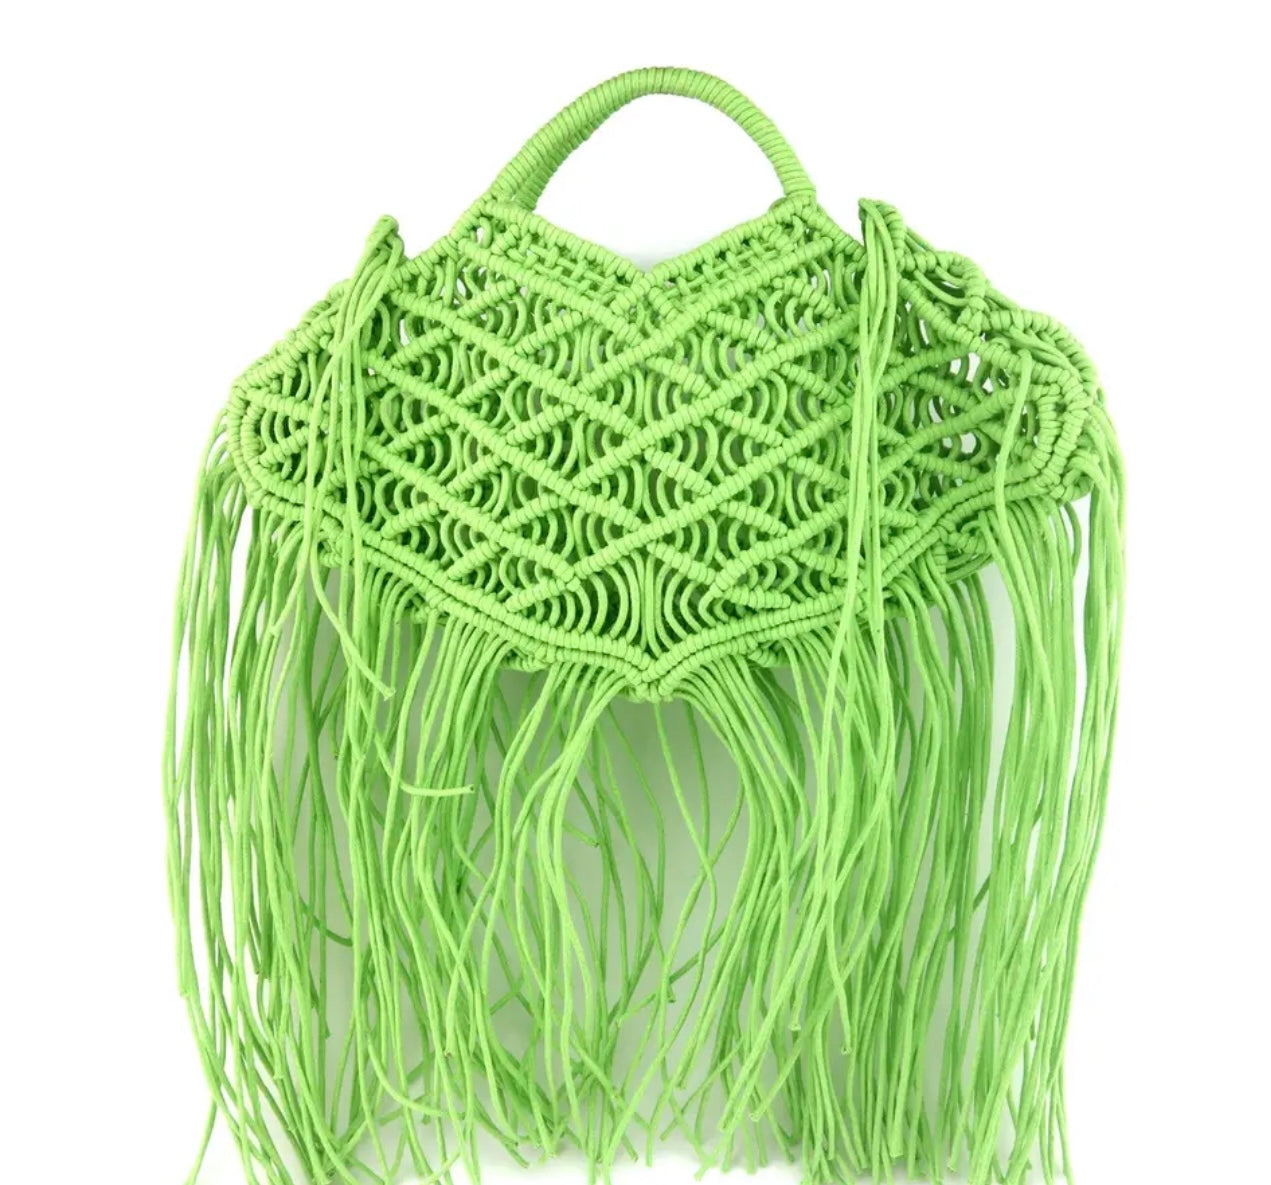 Vacation Style Bohemian Tote Bag (Comes In Other Colors)